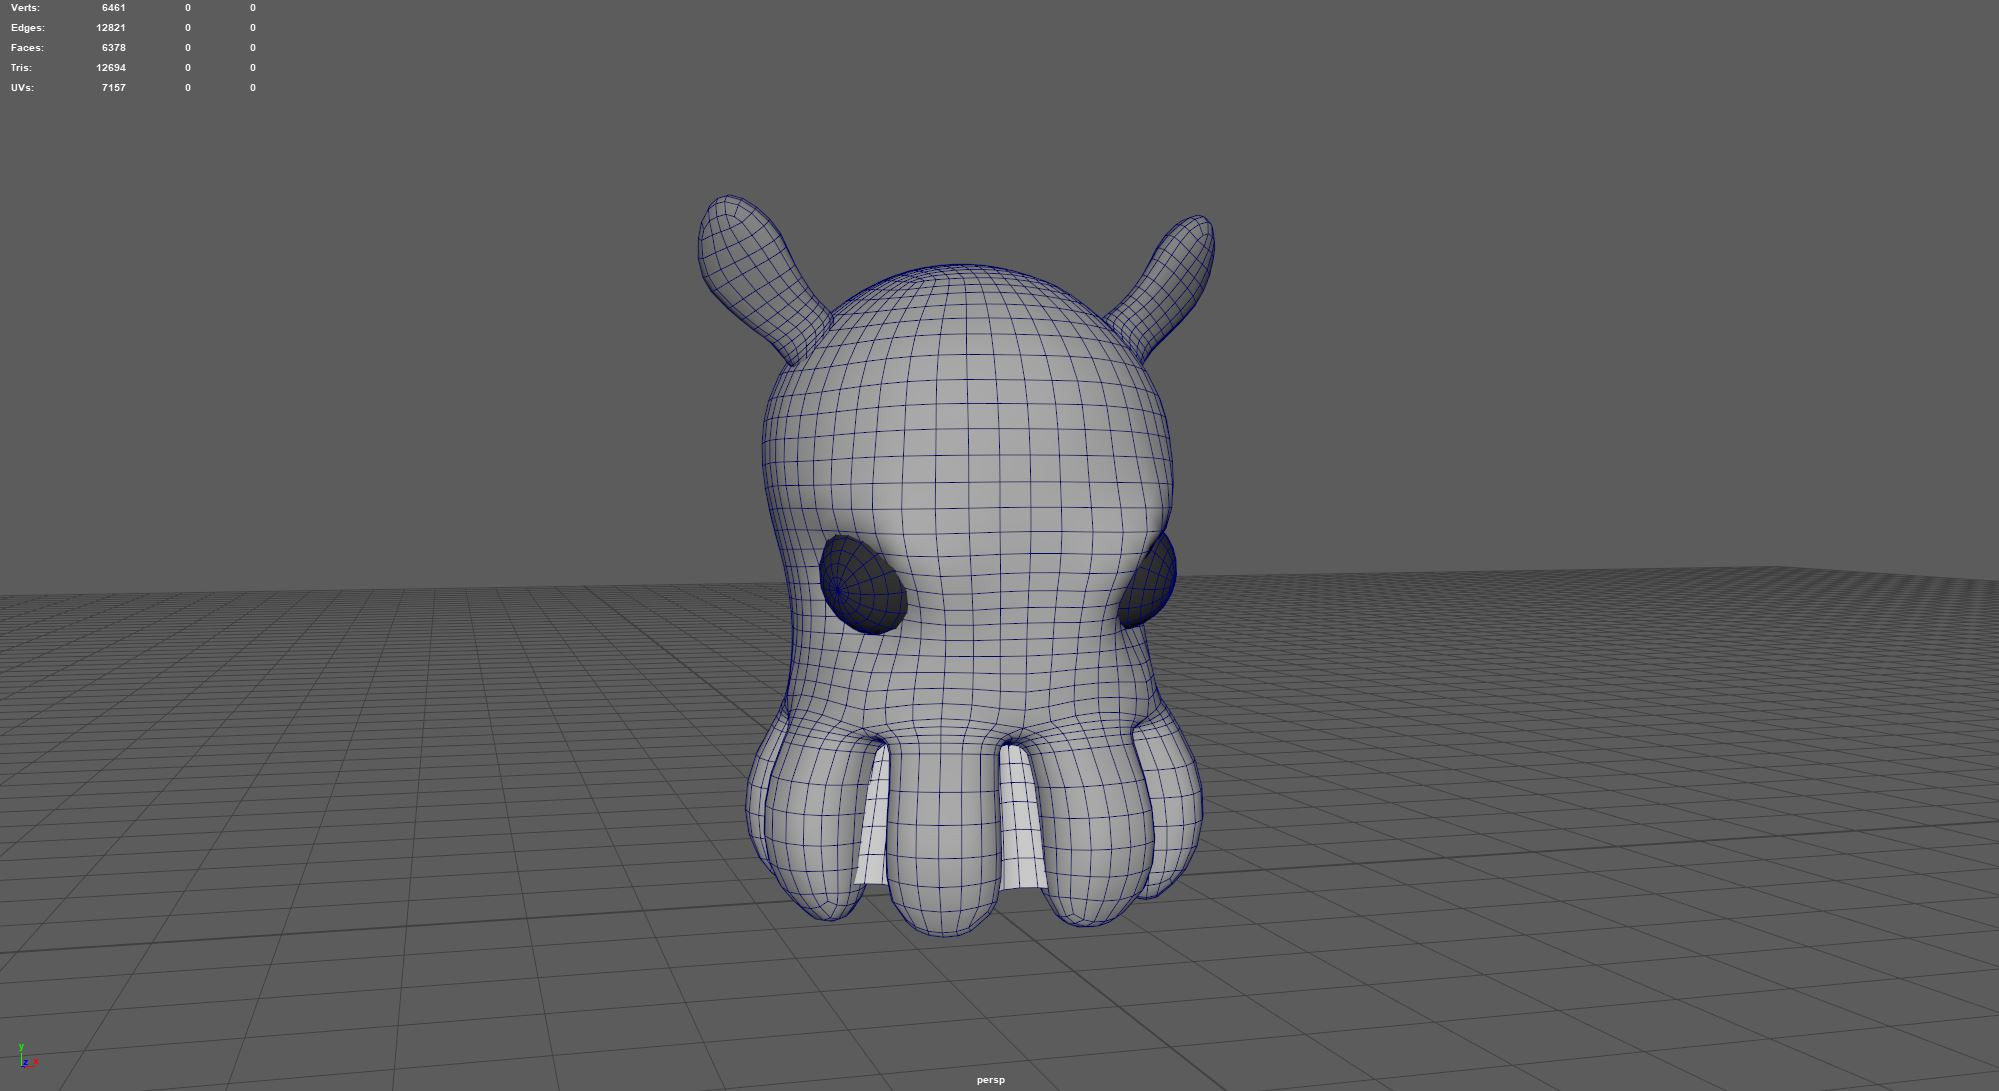 I originally created Glo for my creature rigging class, but my group loved the character and we ended up building our game around this cute little dumbo octopus.